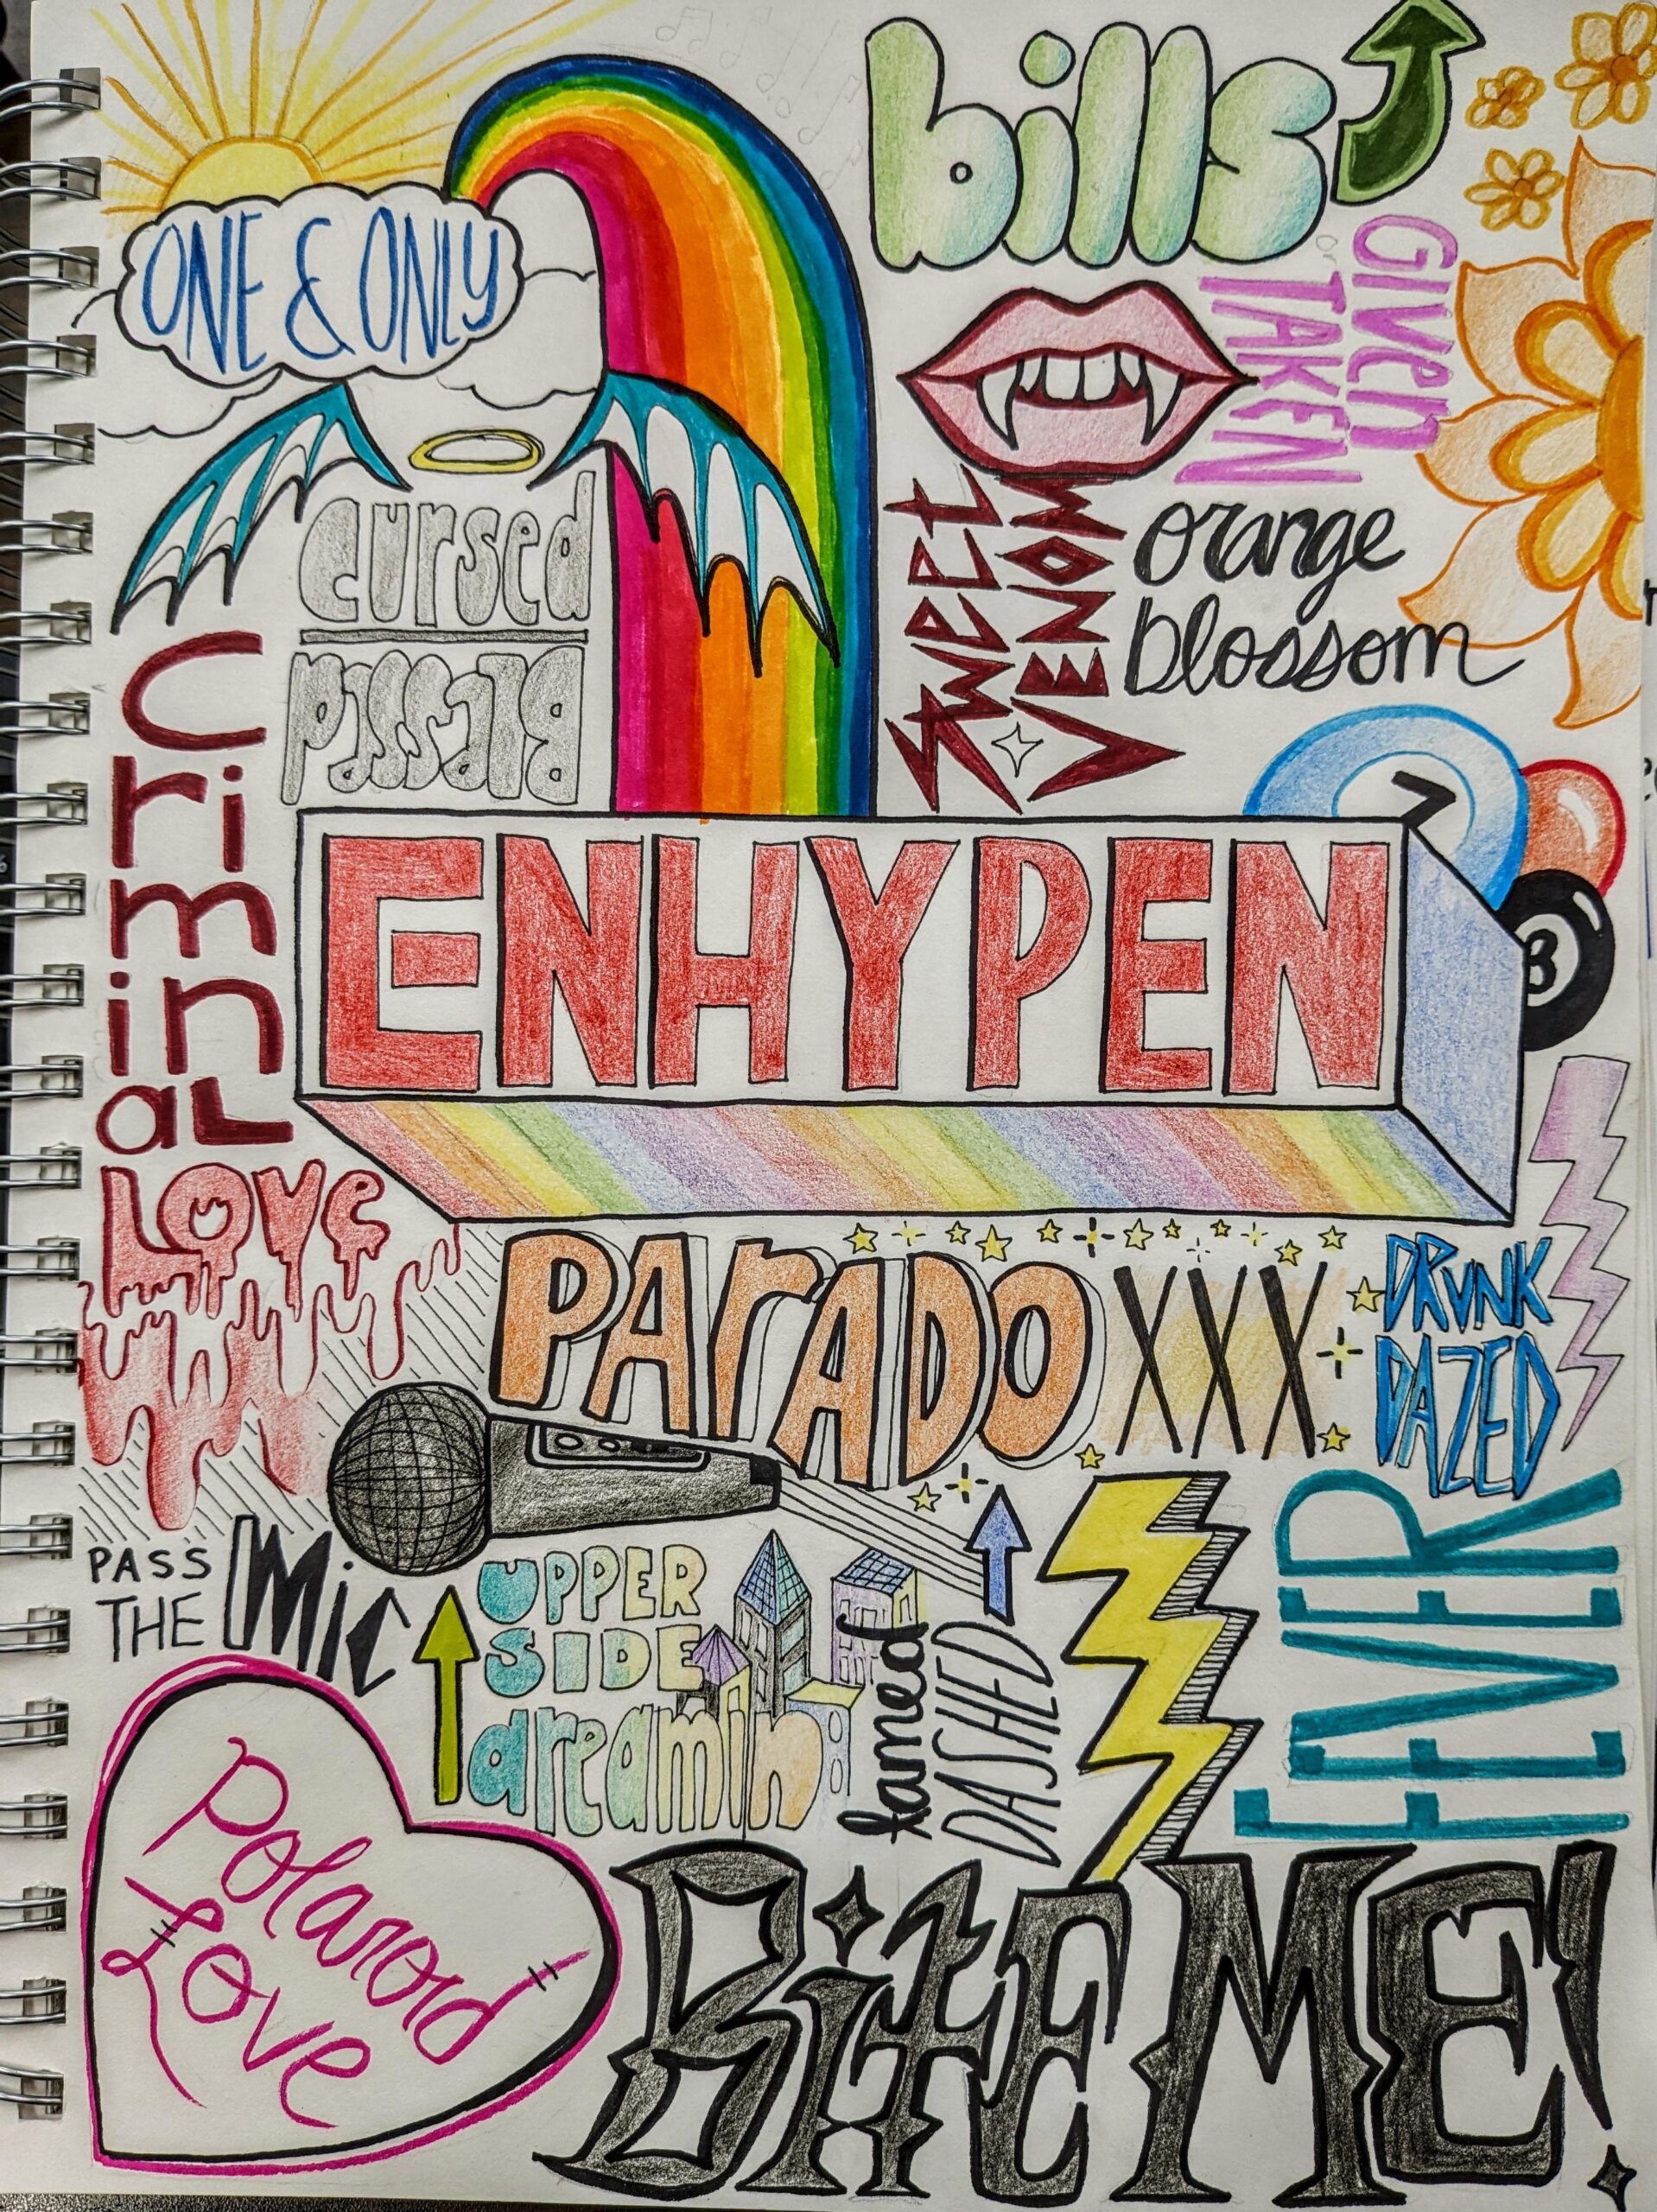 fanart of some tracks from Enhypen I drew today ✨✨✨ do you see your fav Enha track?